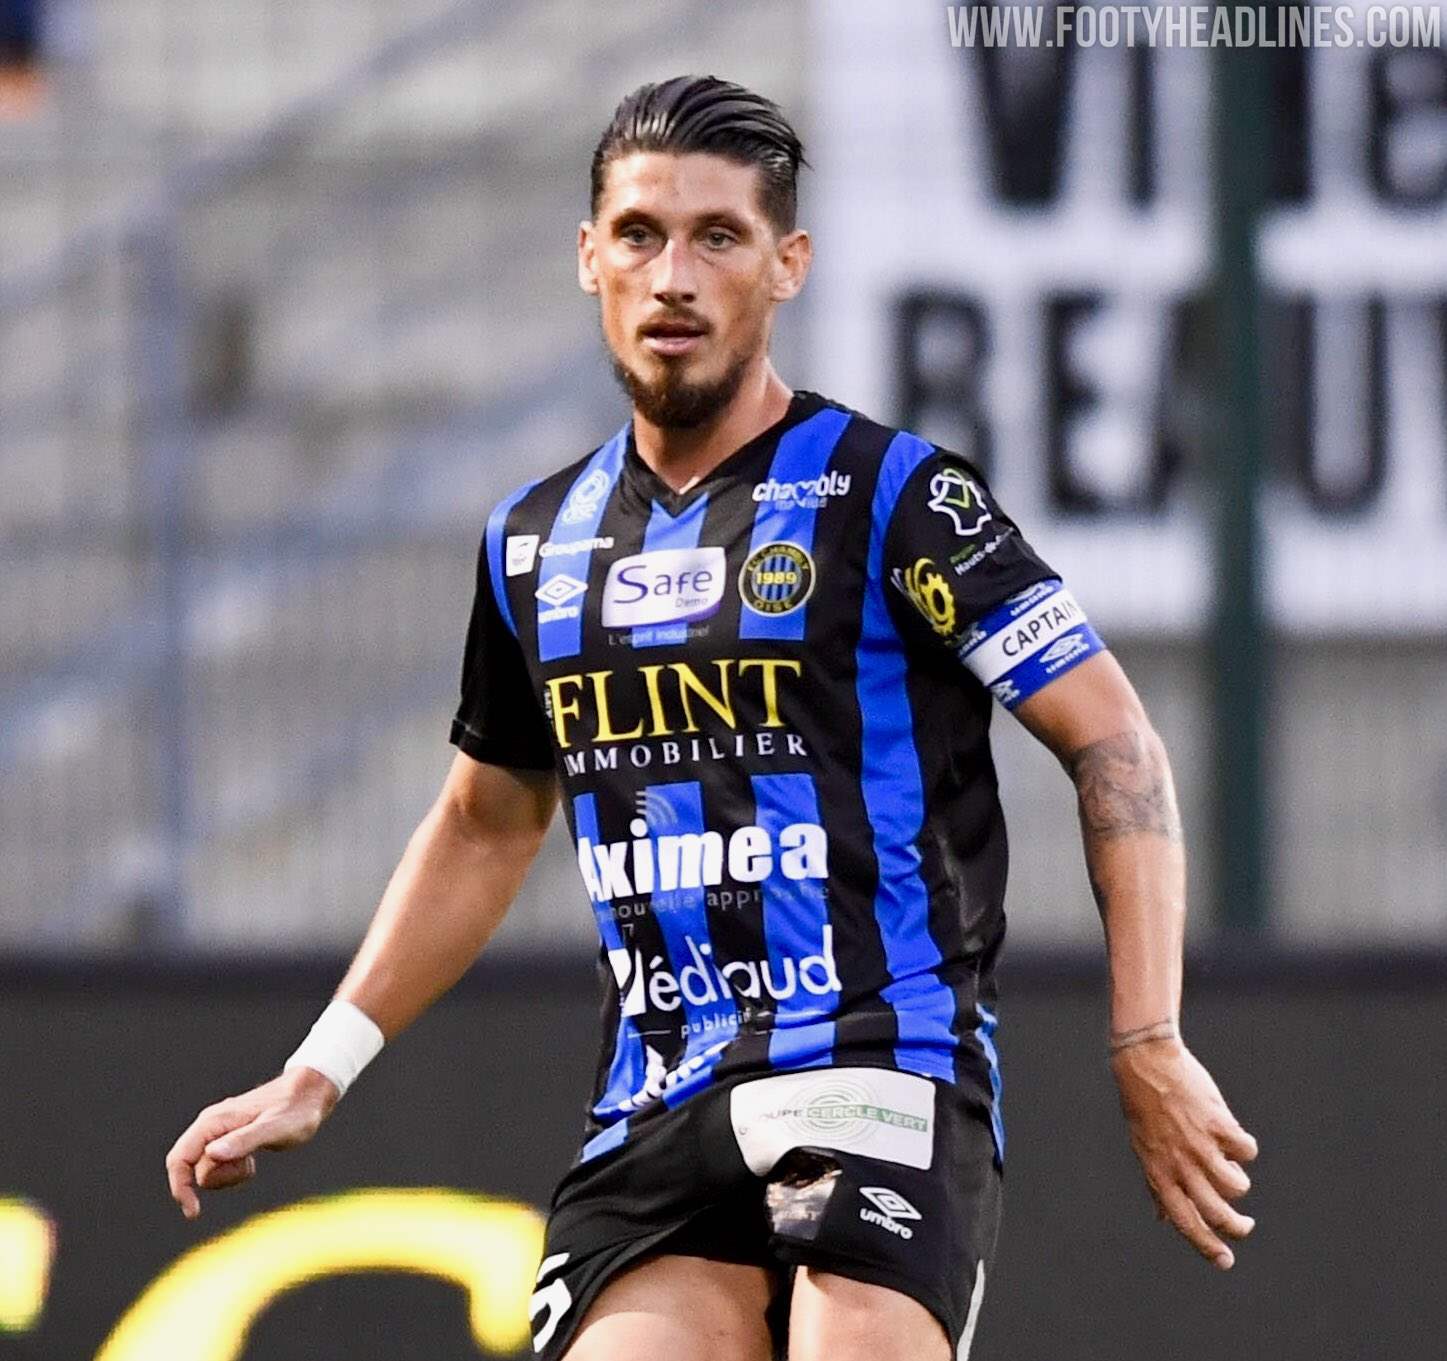 plastered-with-sponsors-fc-chambly-19-20-home-kit-1.jpg